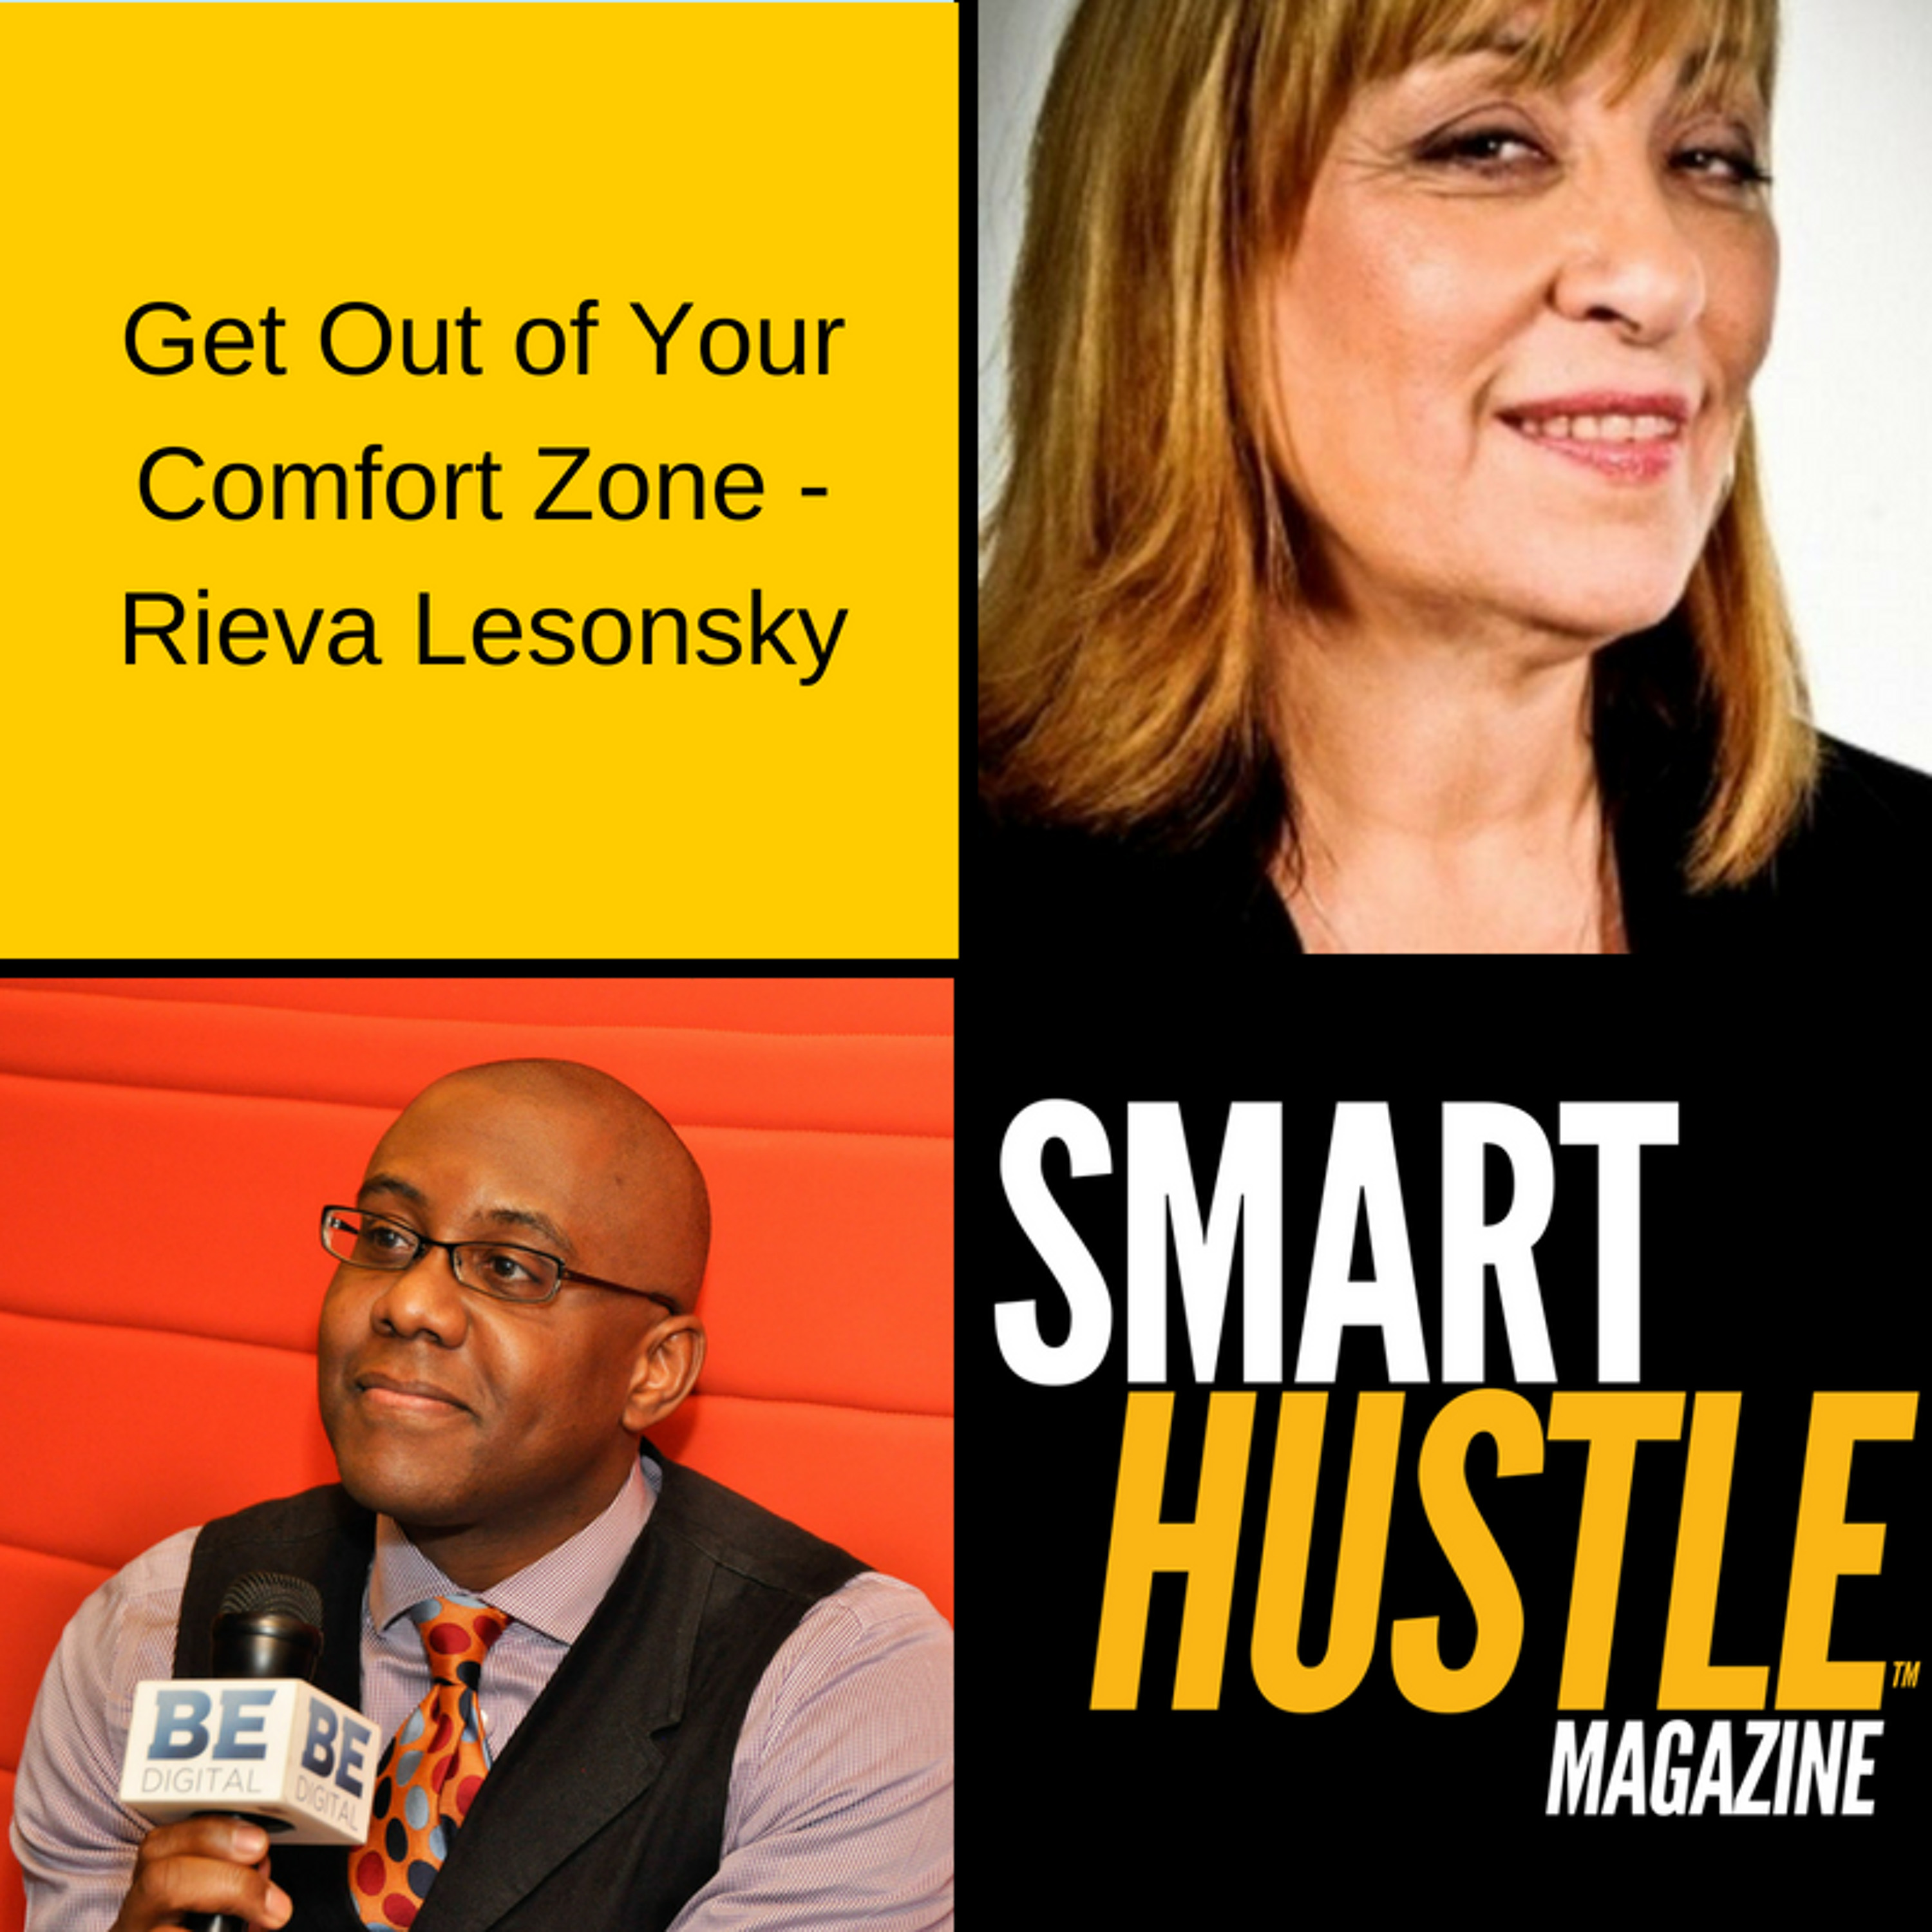 Get Out of Your Comfort Zone - Rieva Lesonsky